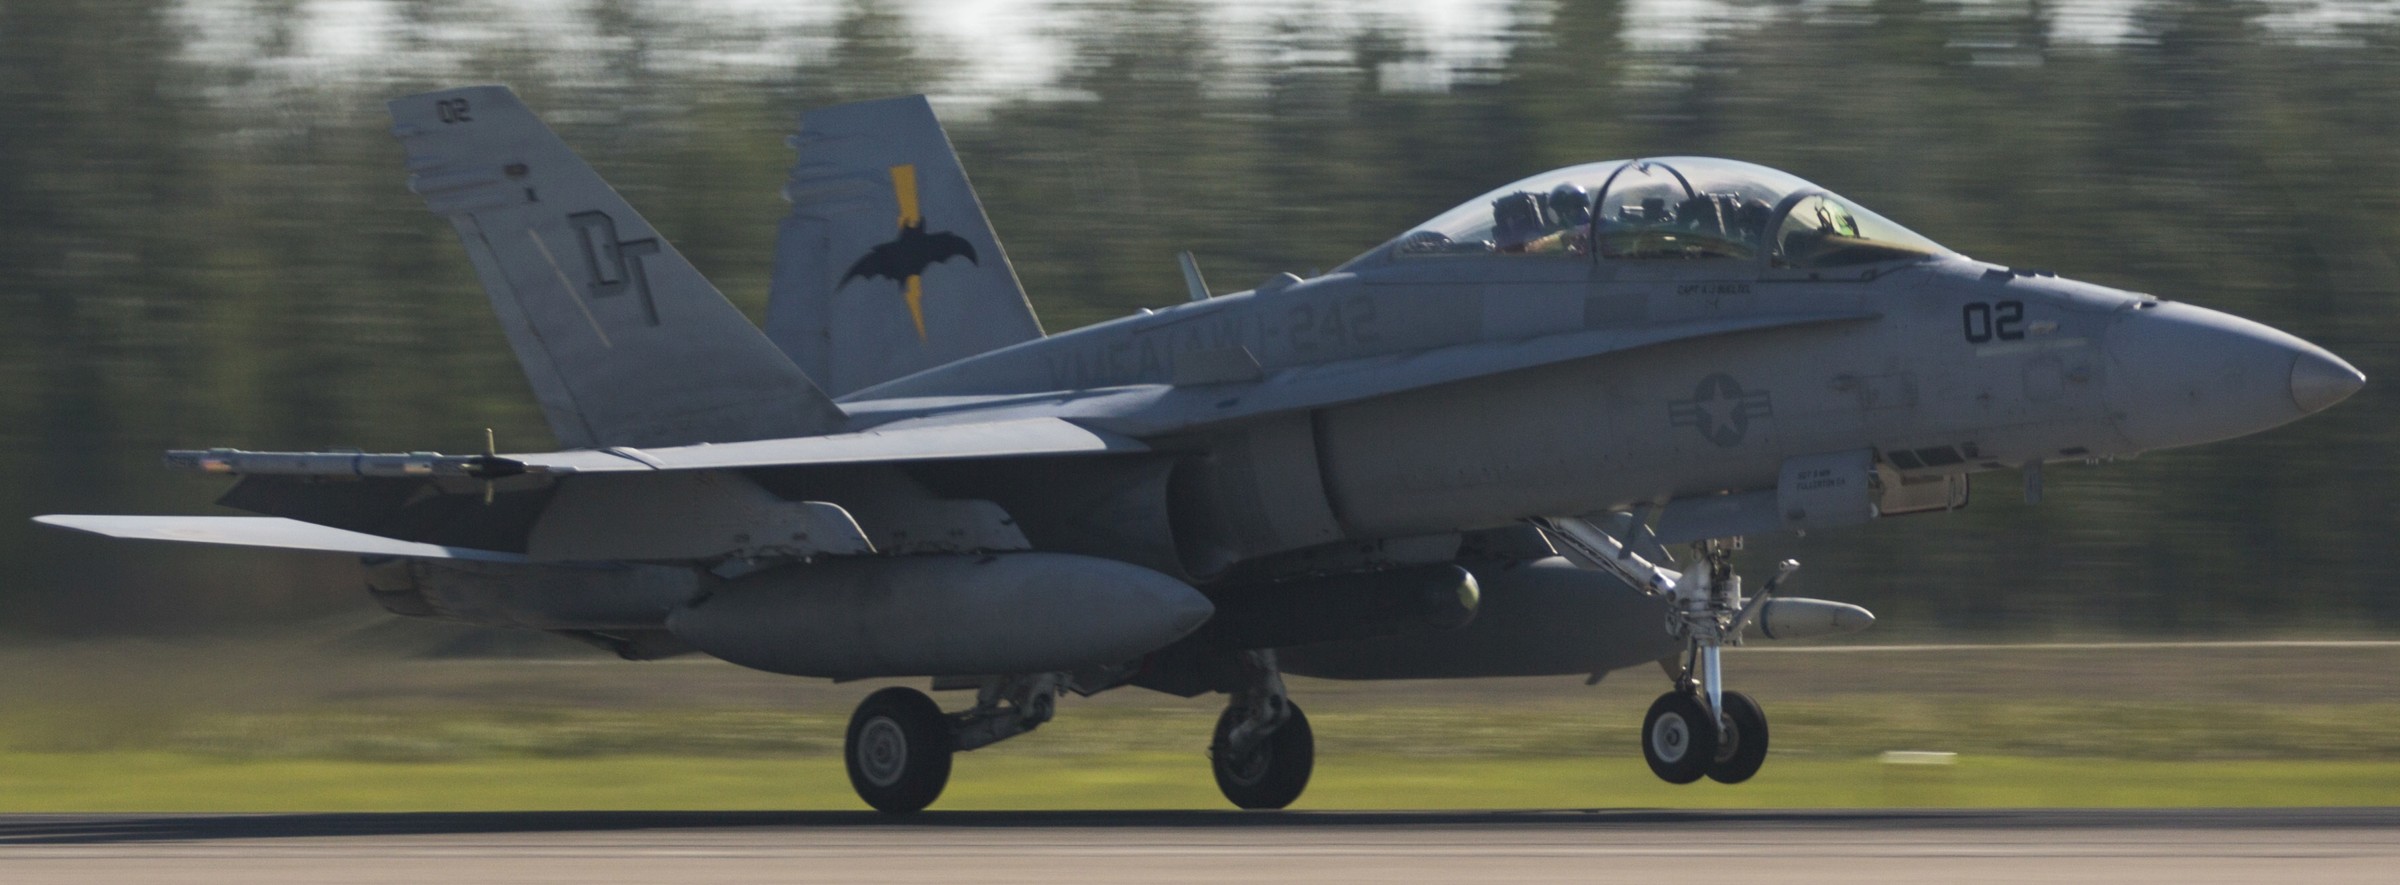 vmfa(aw)-242 bats marine all-weather fighter attack squadron usmc f/a-18d hornet 43 exercise northern edge alaska